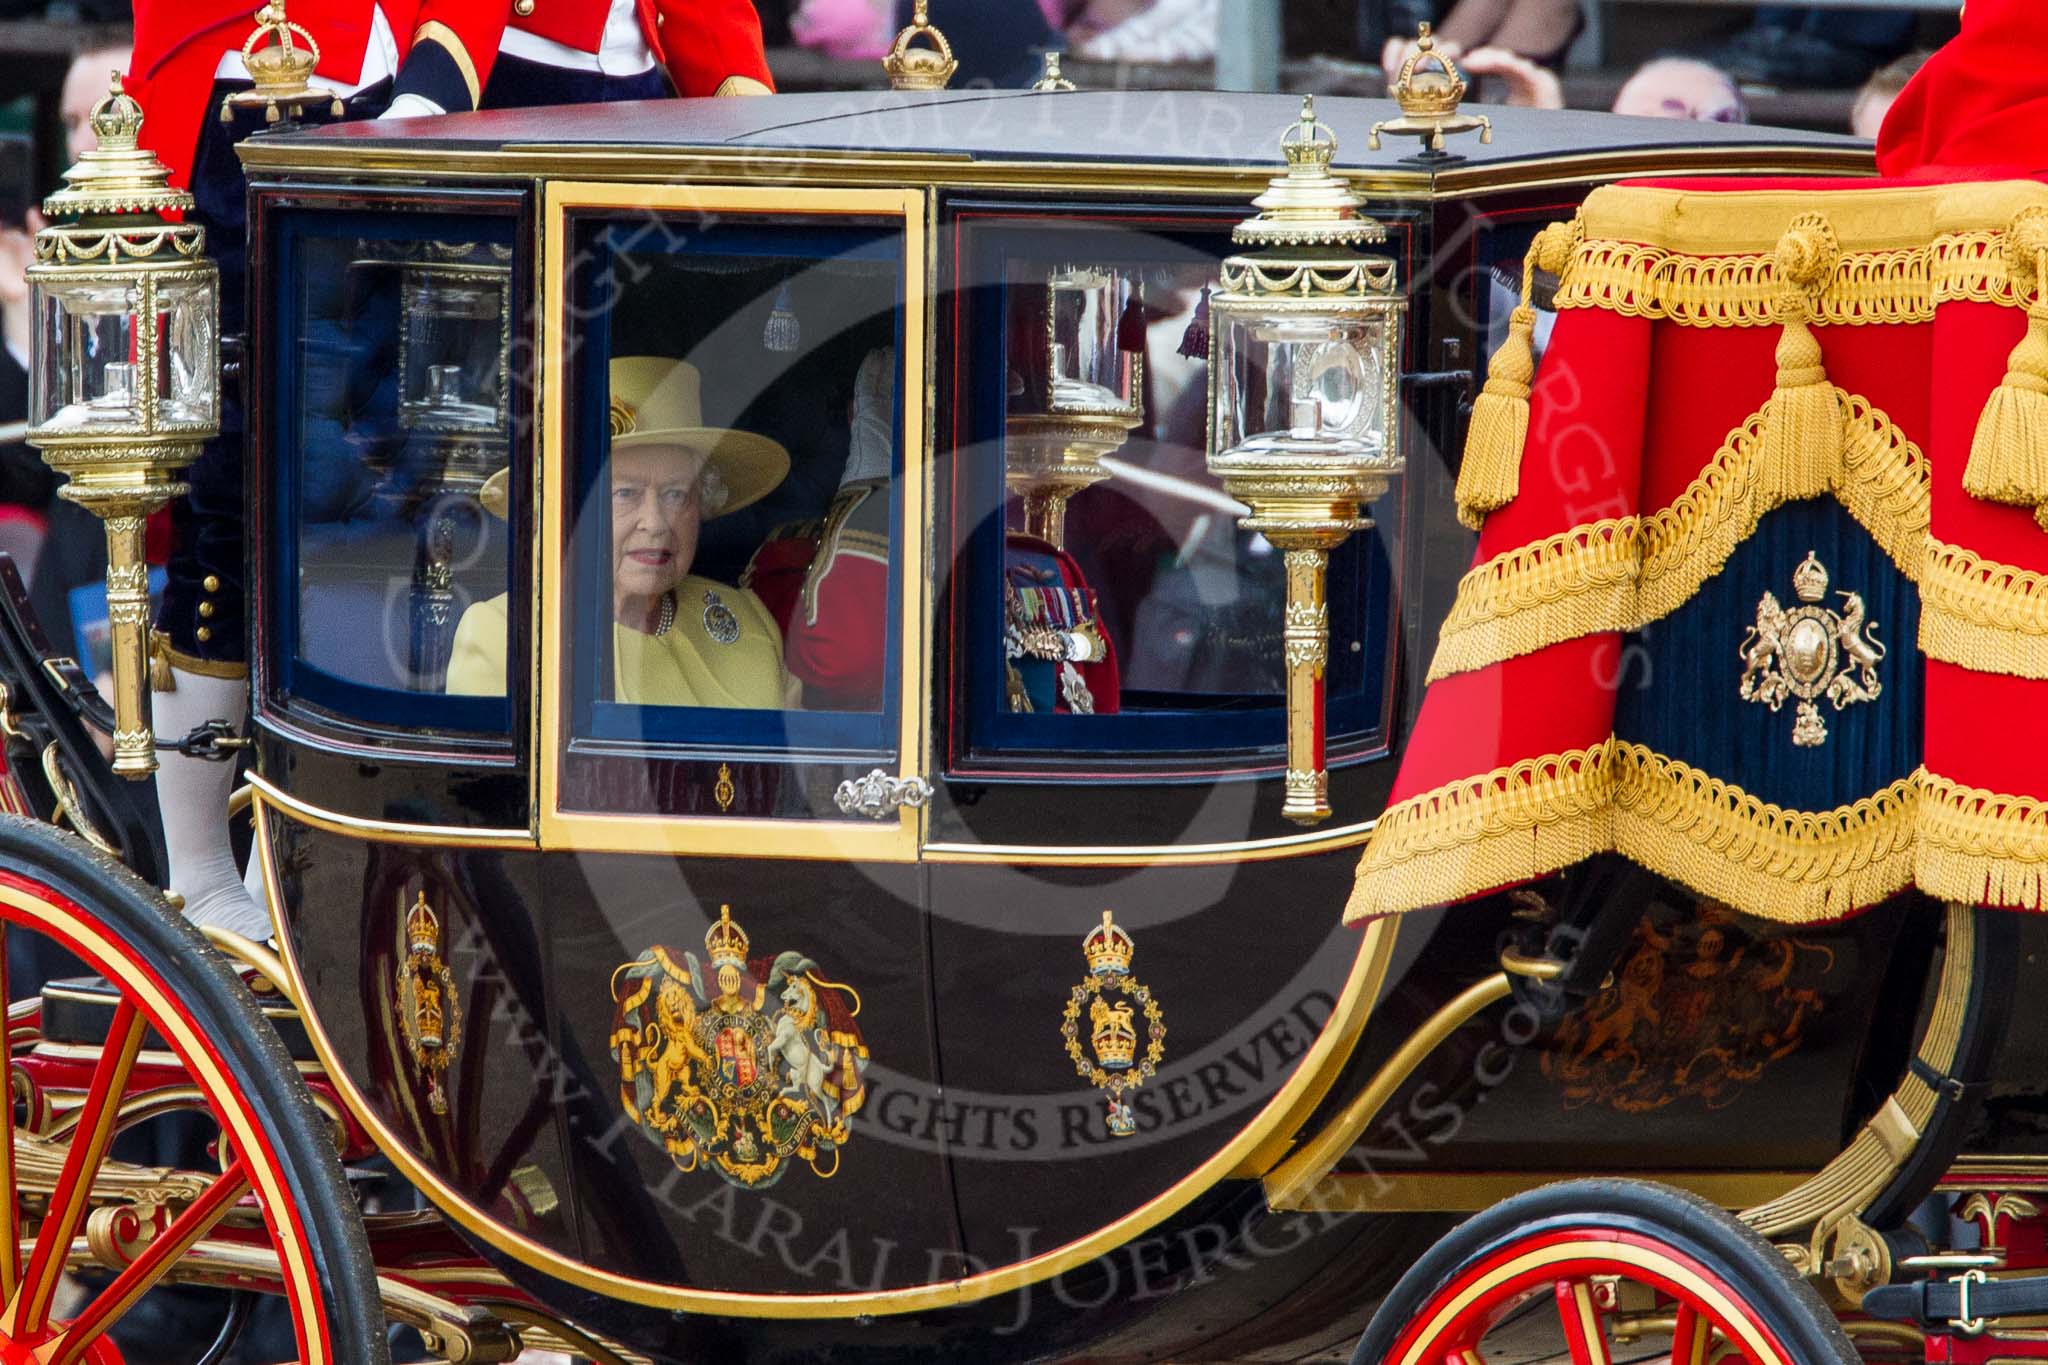 Trooping the Colour 2012: Another close look at HM The Queen and HRH The Prince Philip in the Glass Coach..
Horse Guards Parade, Westminster,
London SW1,

United Kingdom,
on 16 June 2012 at 10:58, image #160